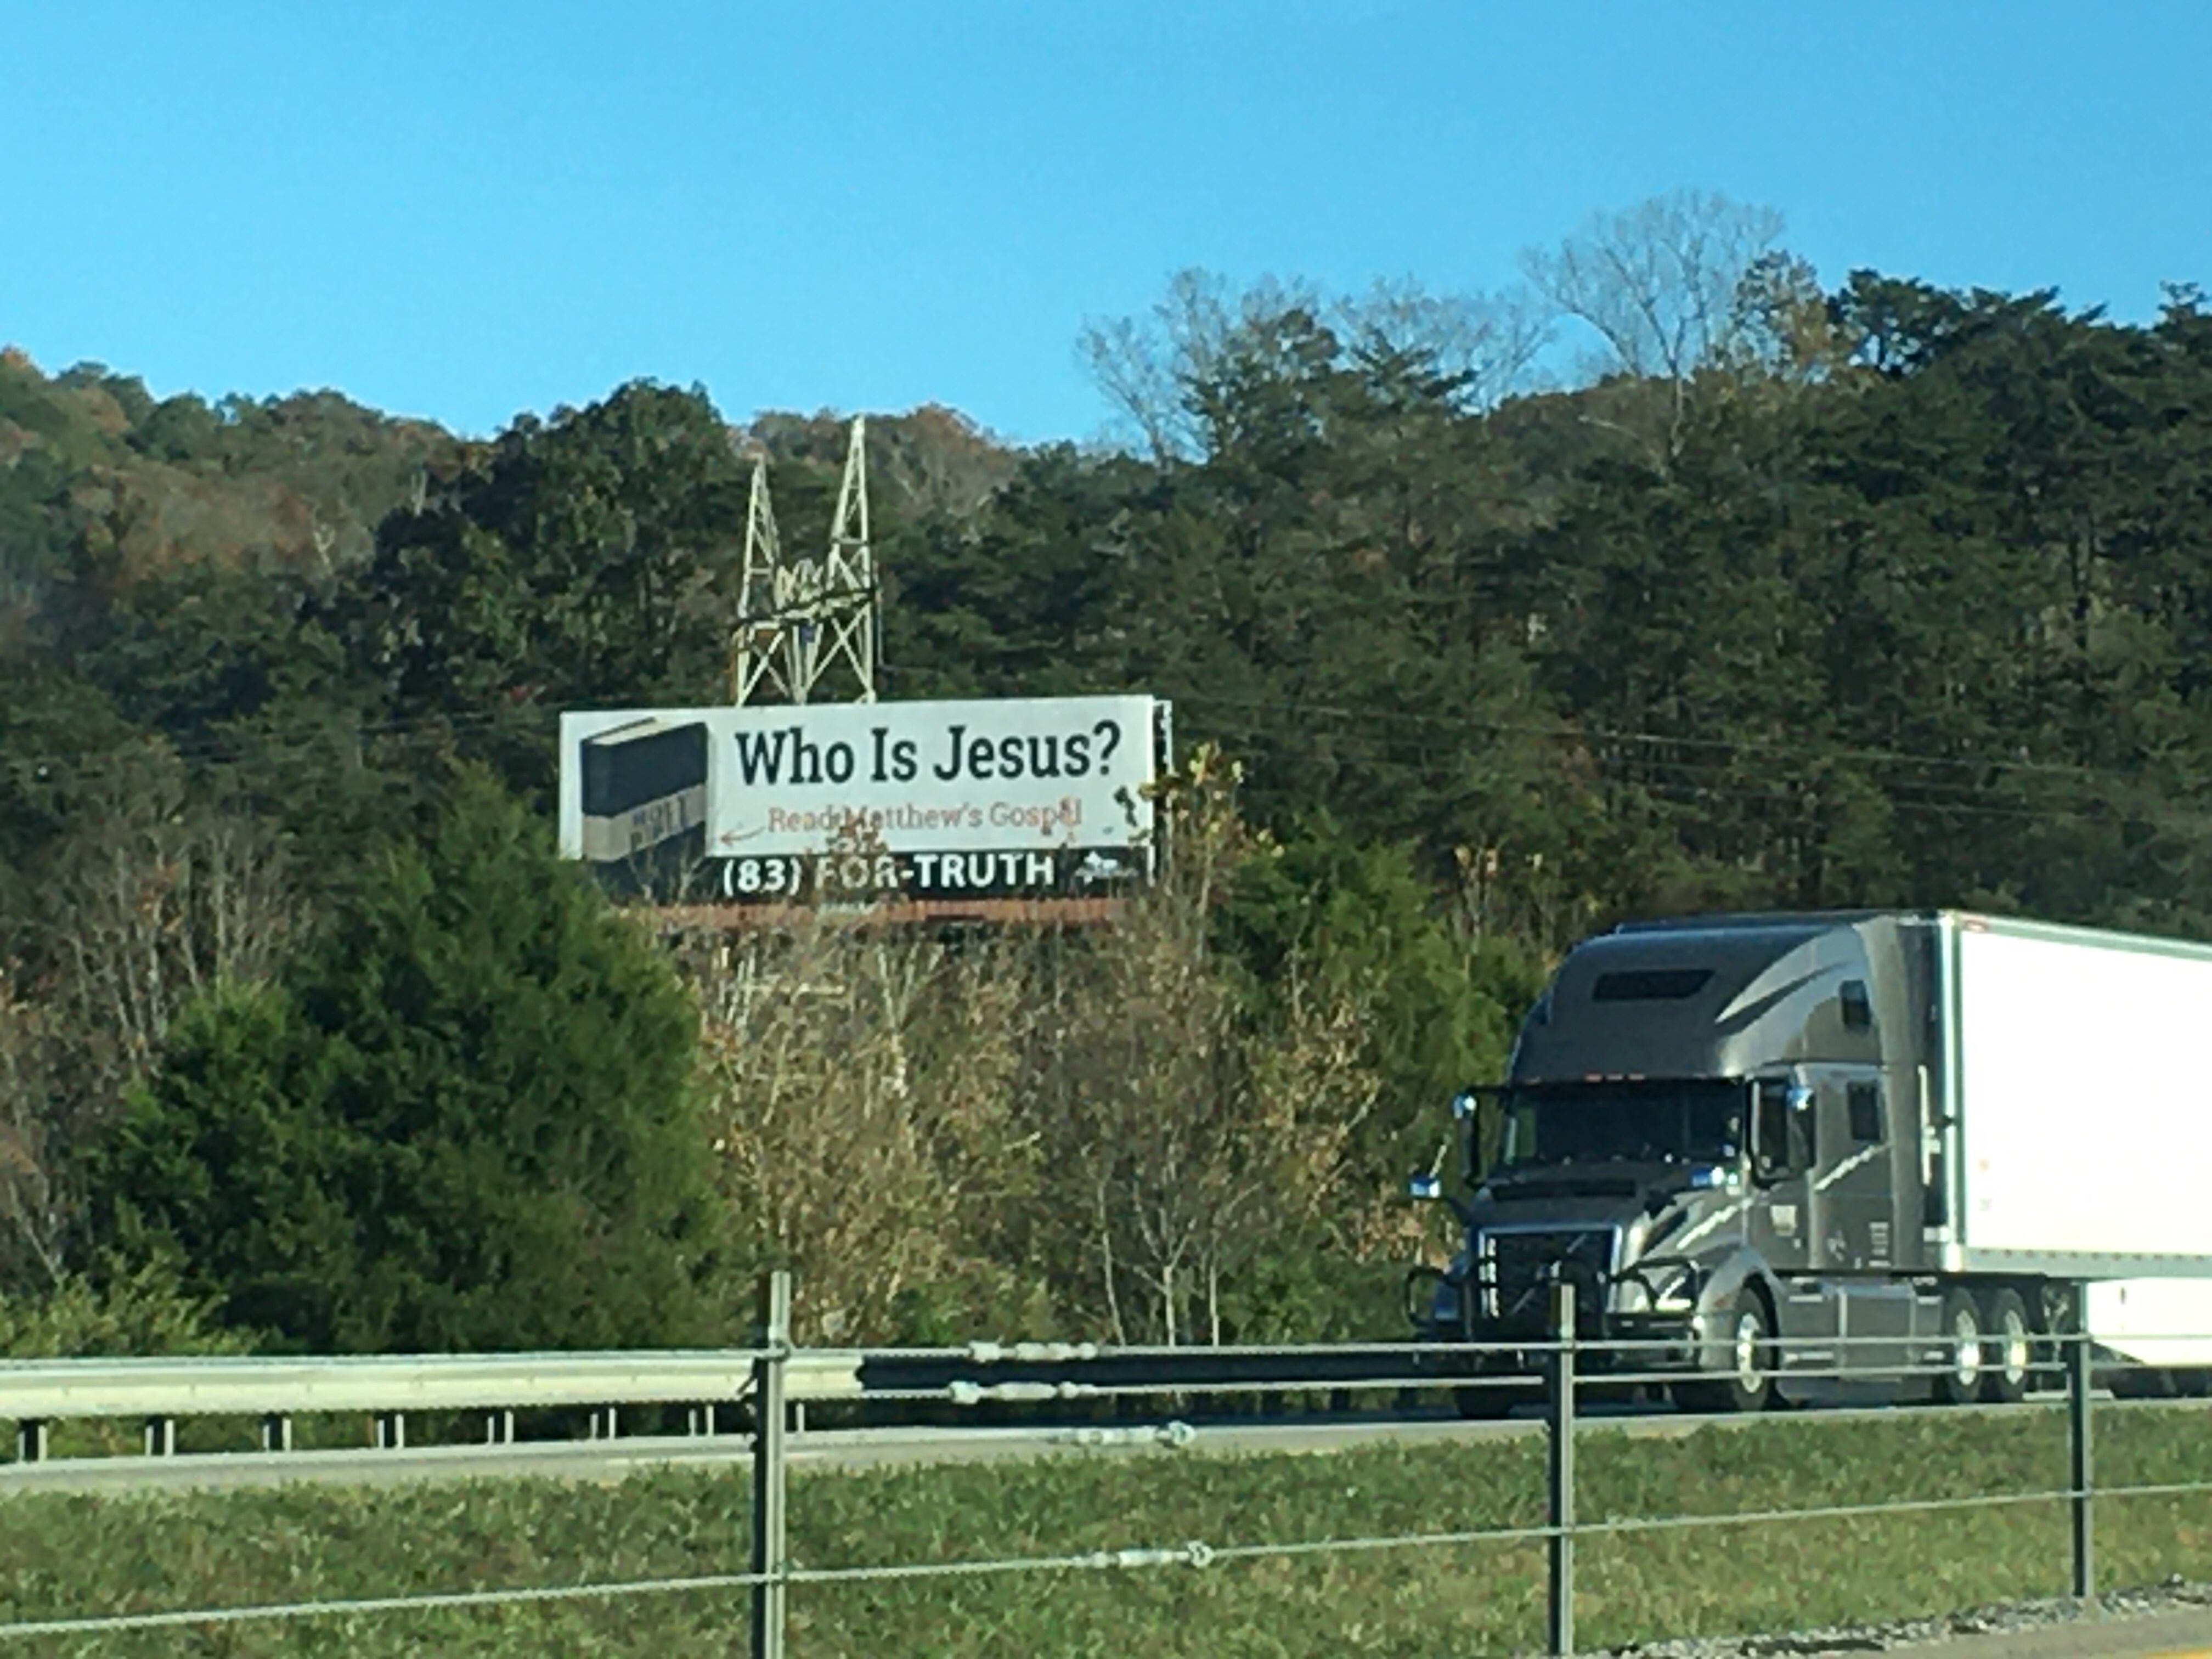 Who is Jesus billboard - I keep seeing this billboard on the interstate. There are a few others like them too. 